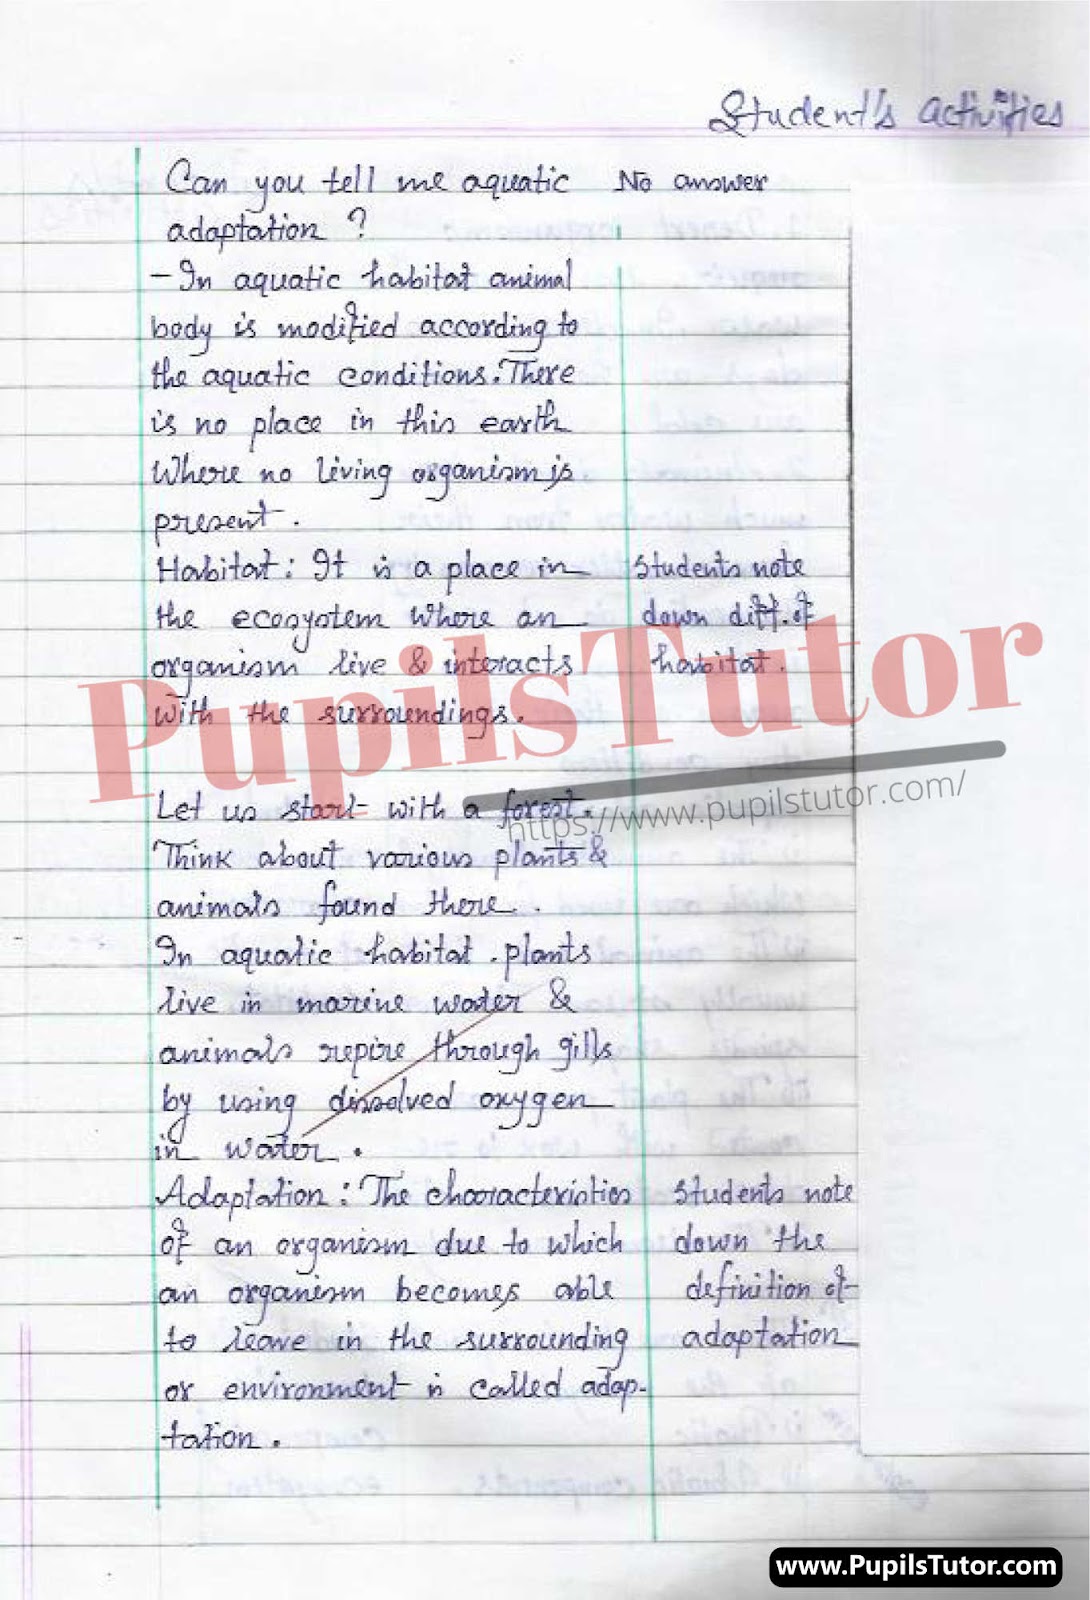 Class/Grade 7 Life Science Lesson Plan On Biotic And Abiotic Components For CBSE NCERT KVS School And University College Teachers – (Page And Image Number 3) – www.pupilstutor.com